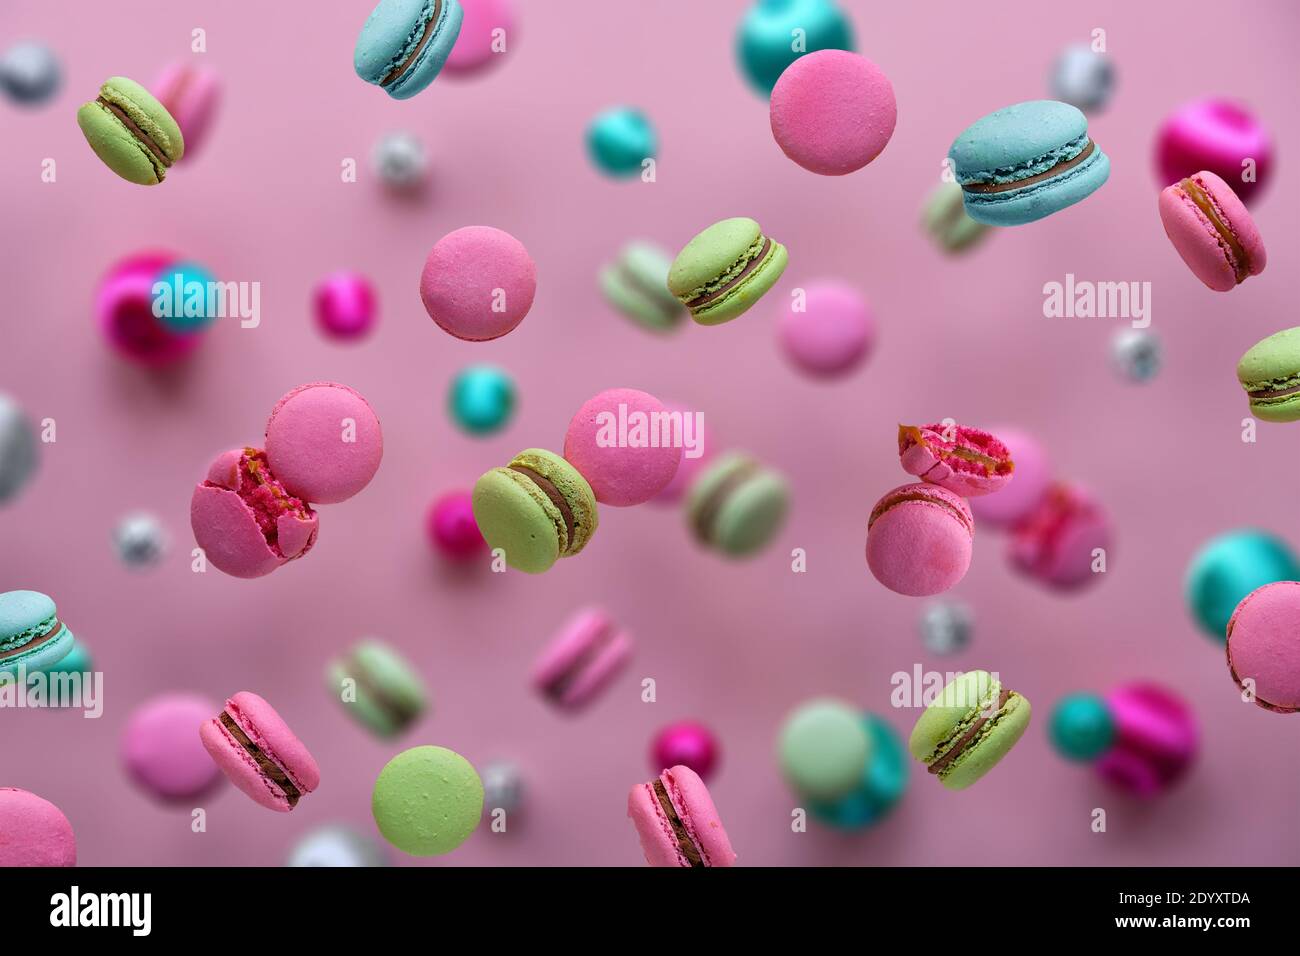 Levitation of macaroons, creative food concept. Bold vibrant pink, mint green, mint blue and magenta colors. Flying macaroons, disco balls and Stock Photo